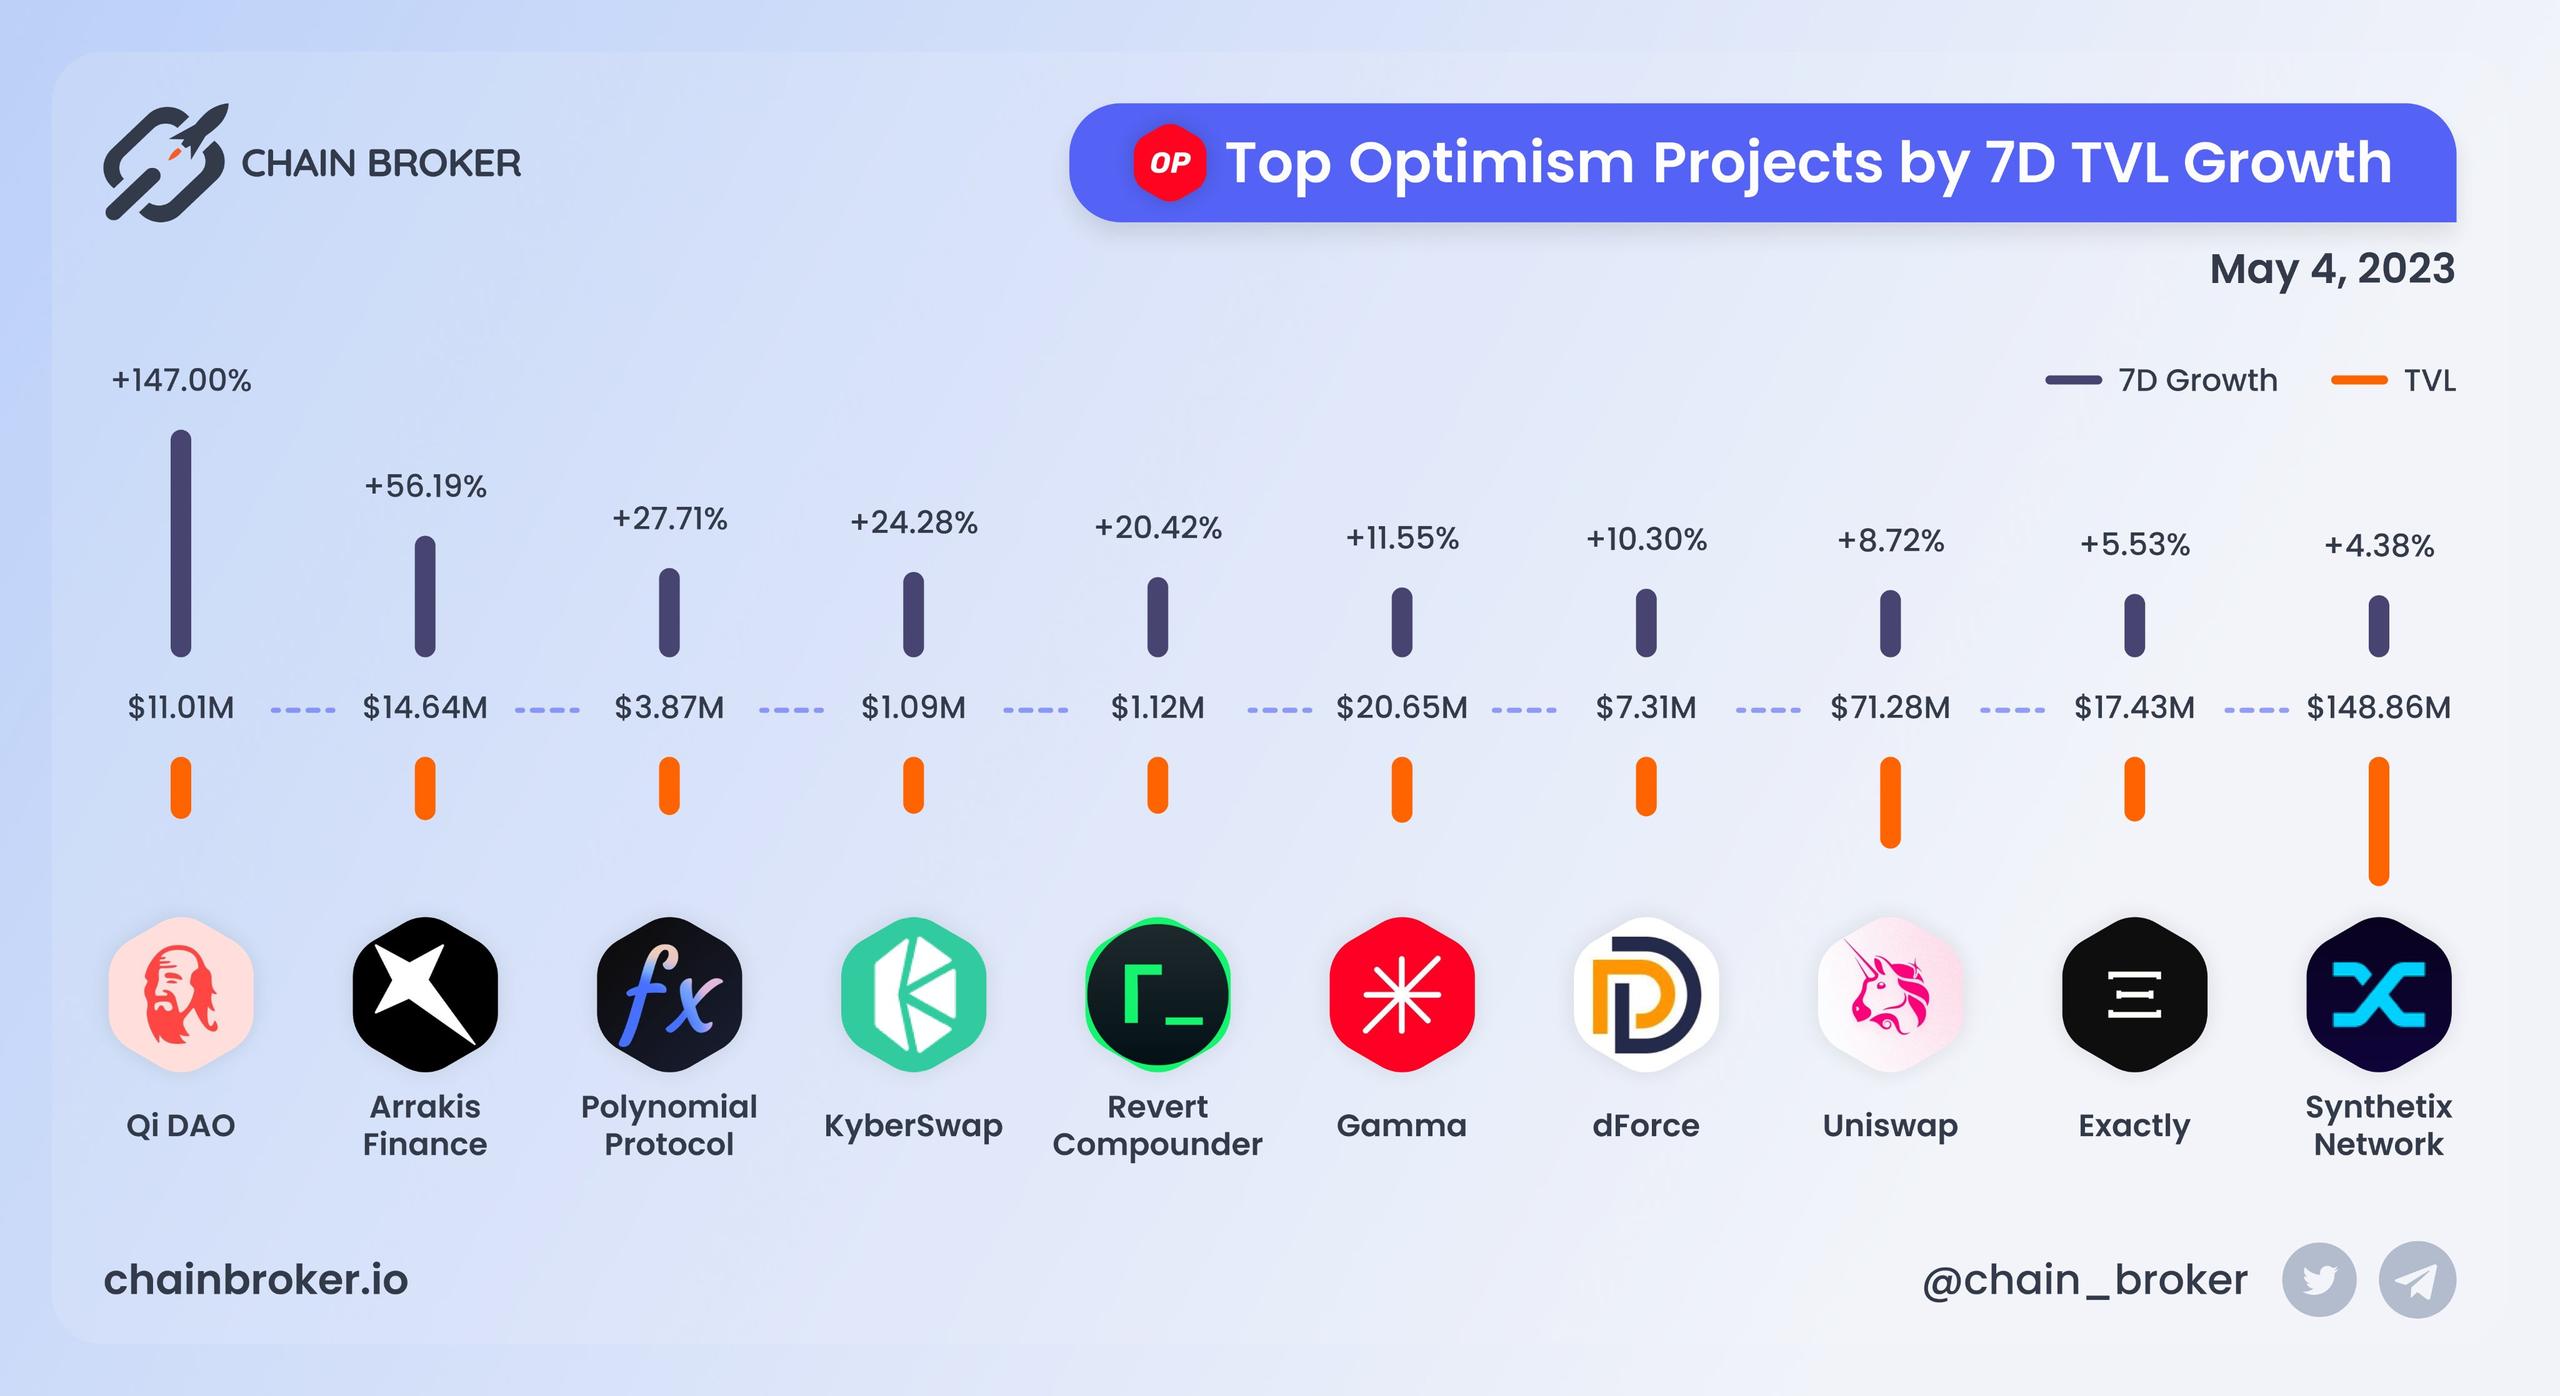 Top Optimism projects by 7D TVL growth